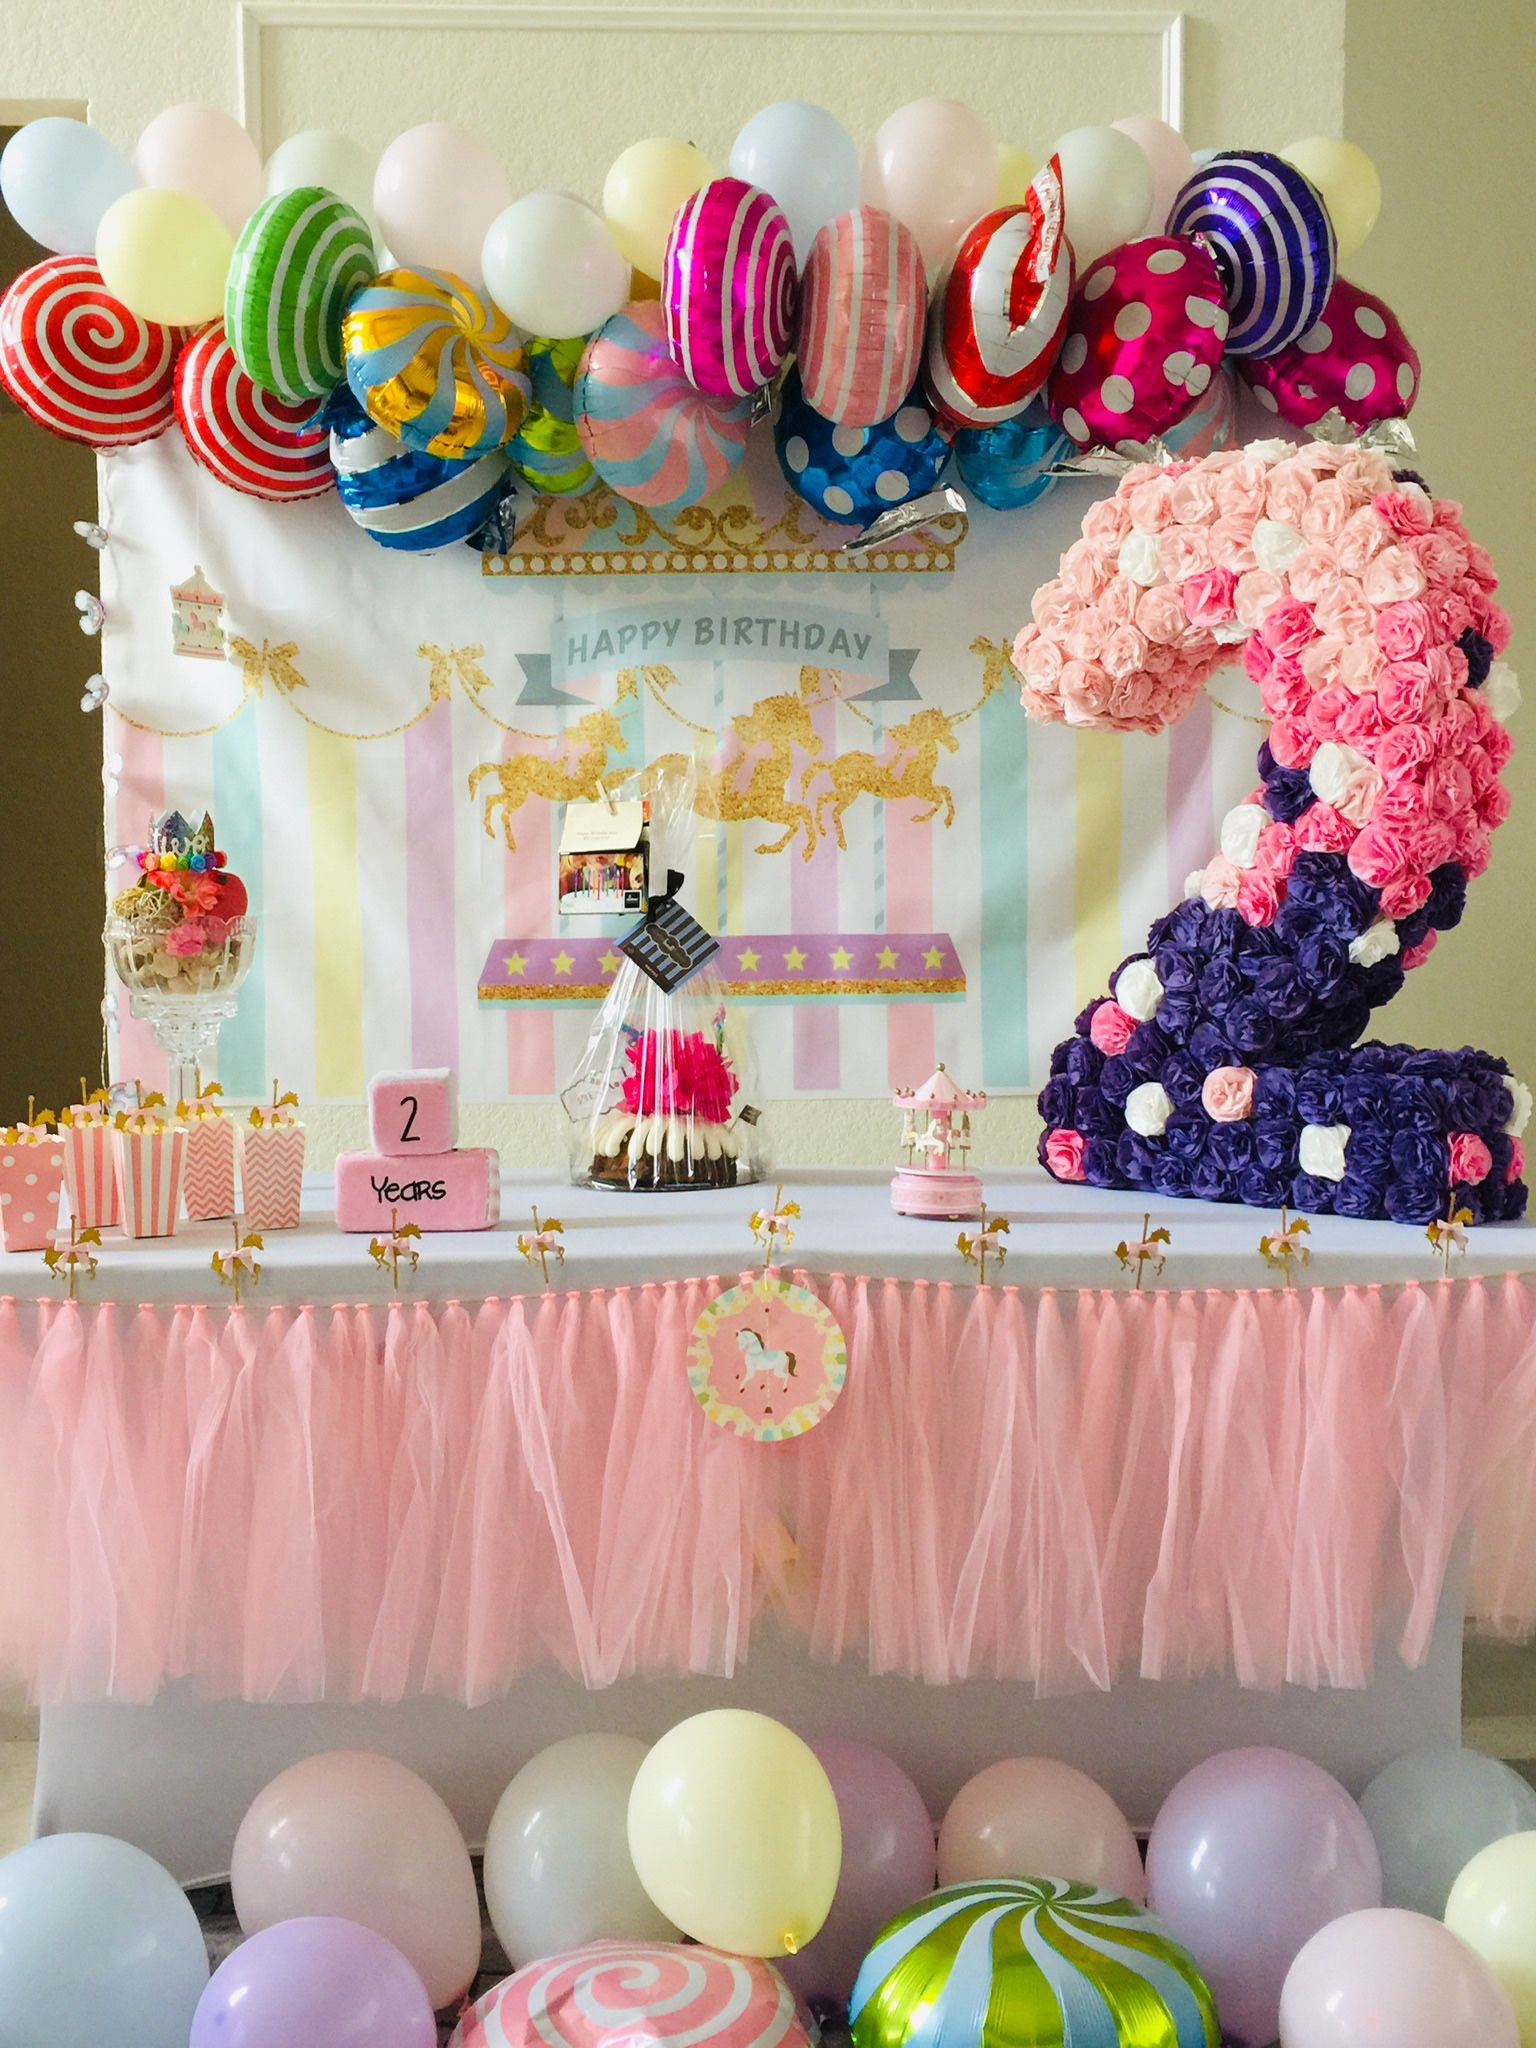 Carousel Birthday Party Supplies - Decoration